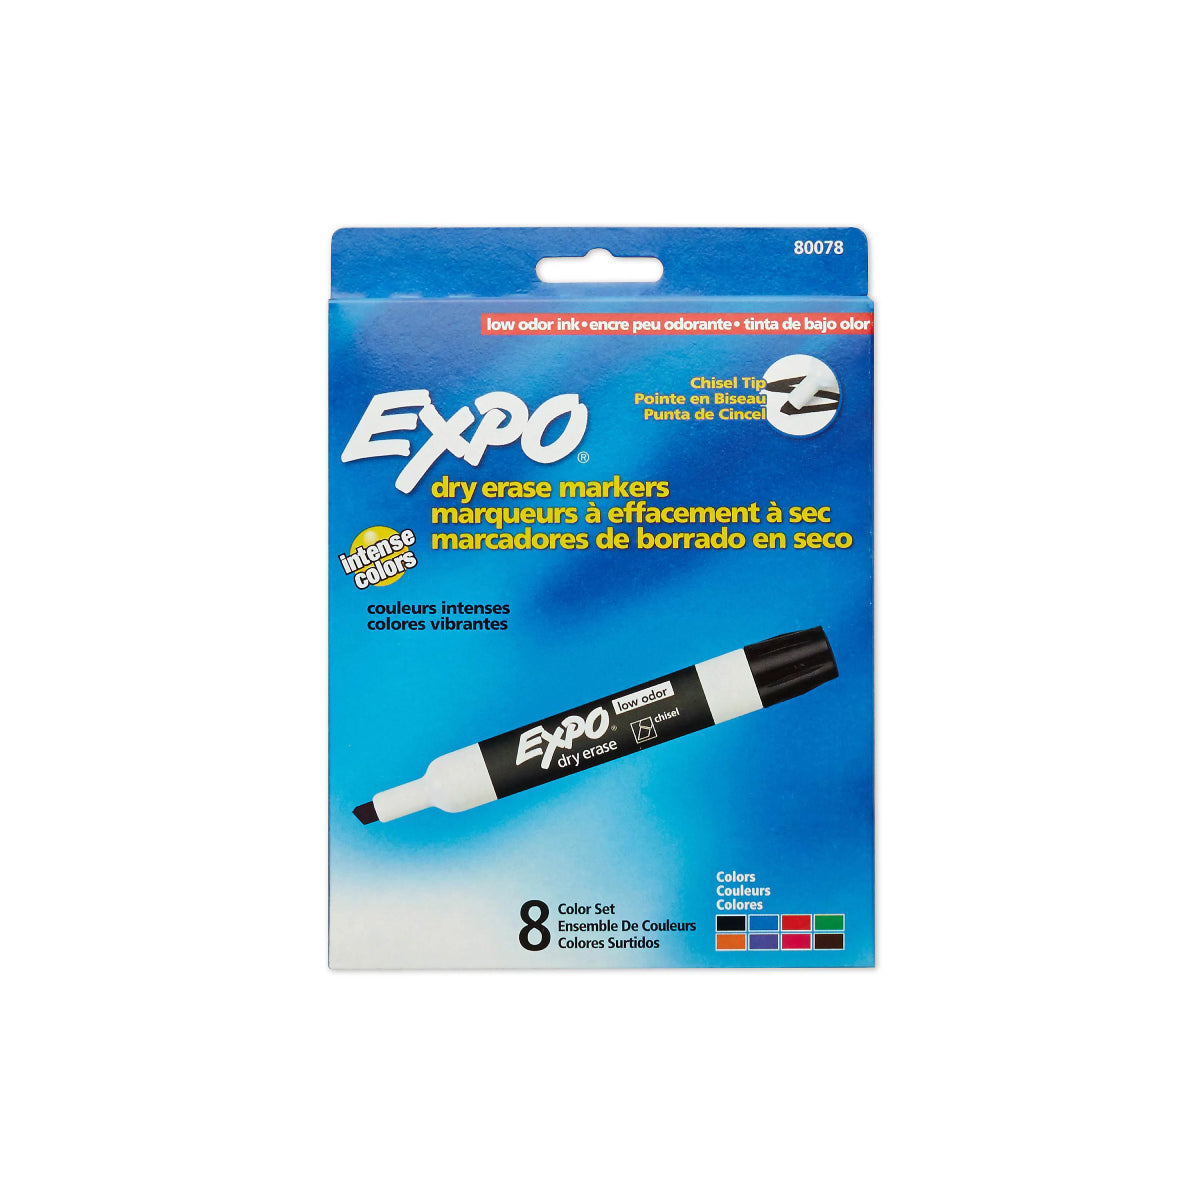 Expo, Low Odor Dry Erase Markers, Chisel Tip, Set of 8 Assorted Colors -  Mogahwi Stationery